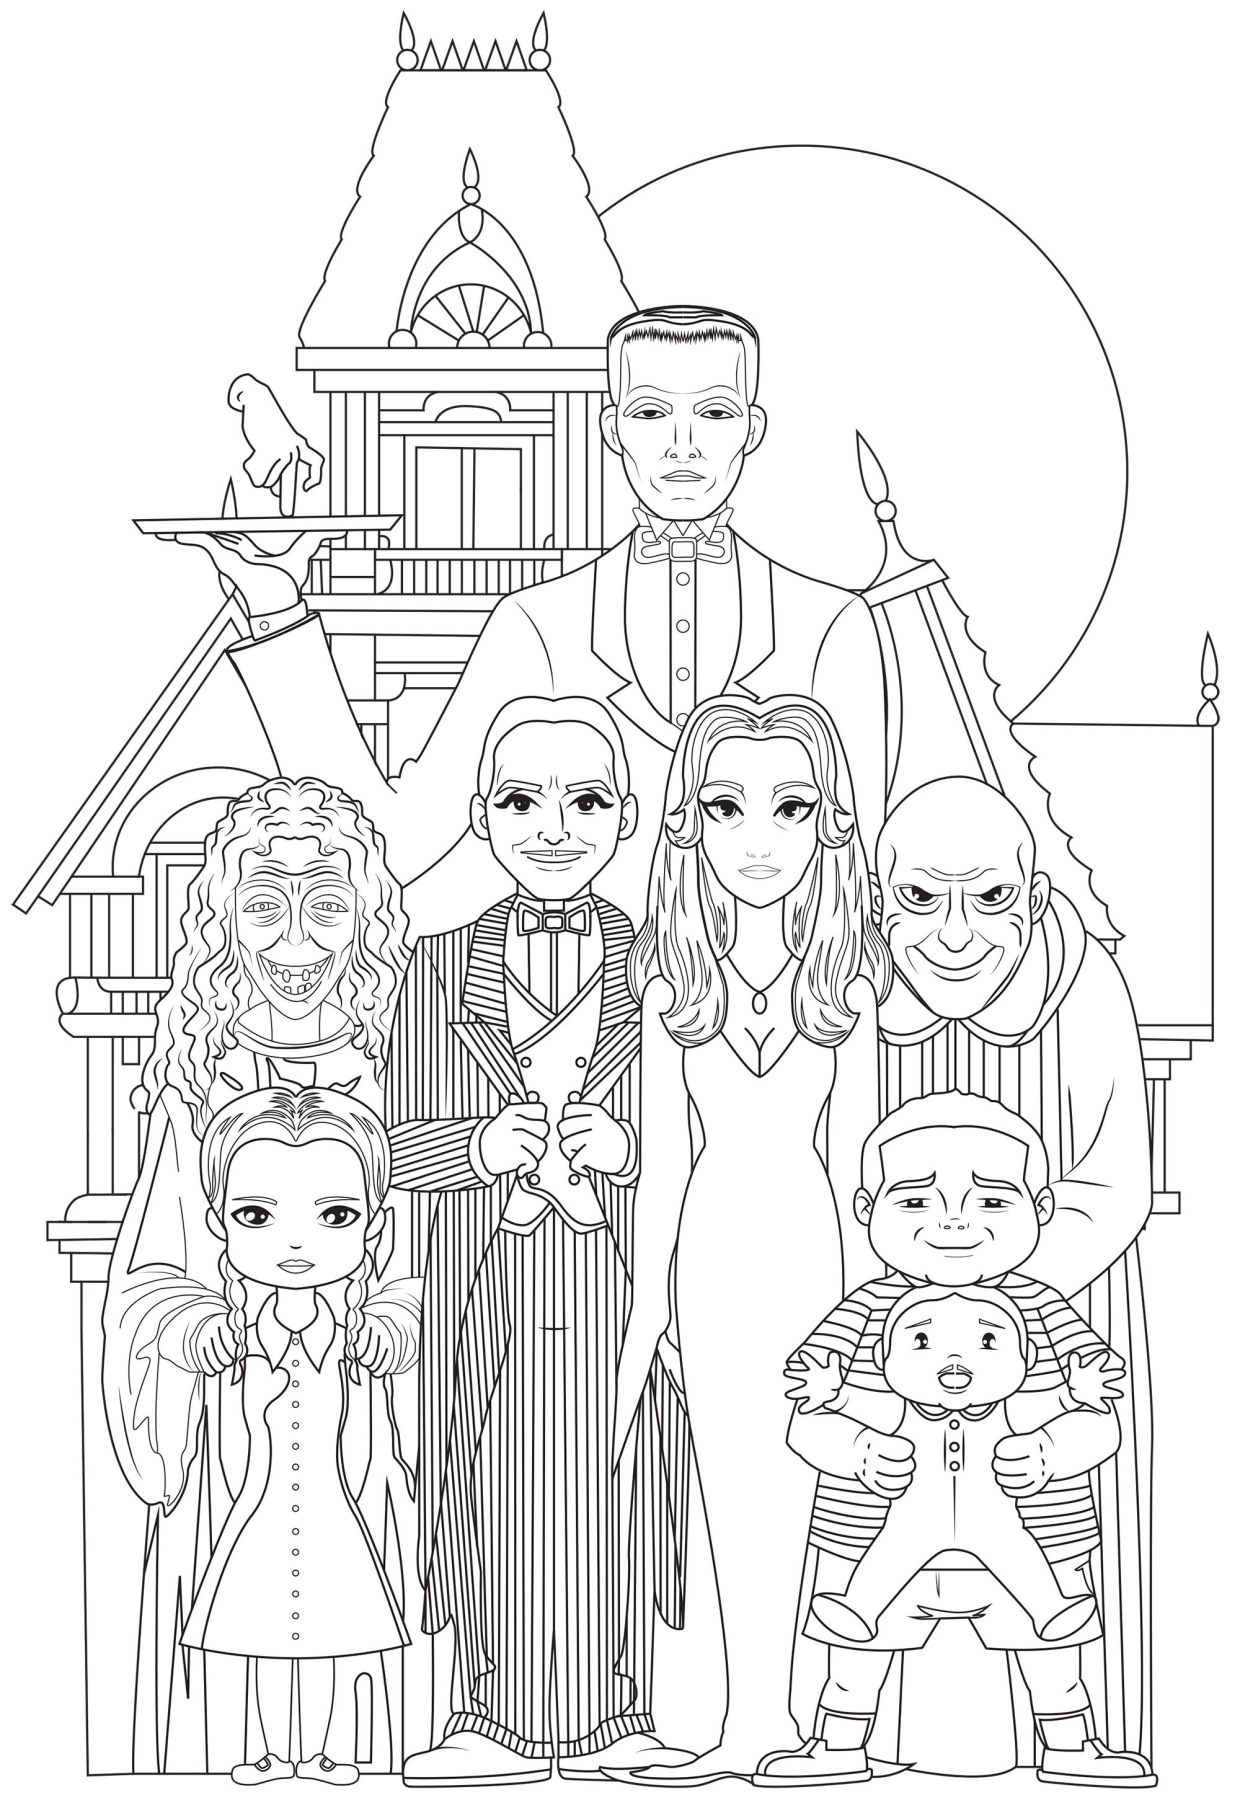 Enjoy the spooky fun with addams family coloring pages